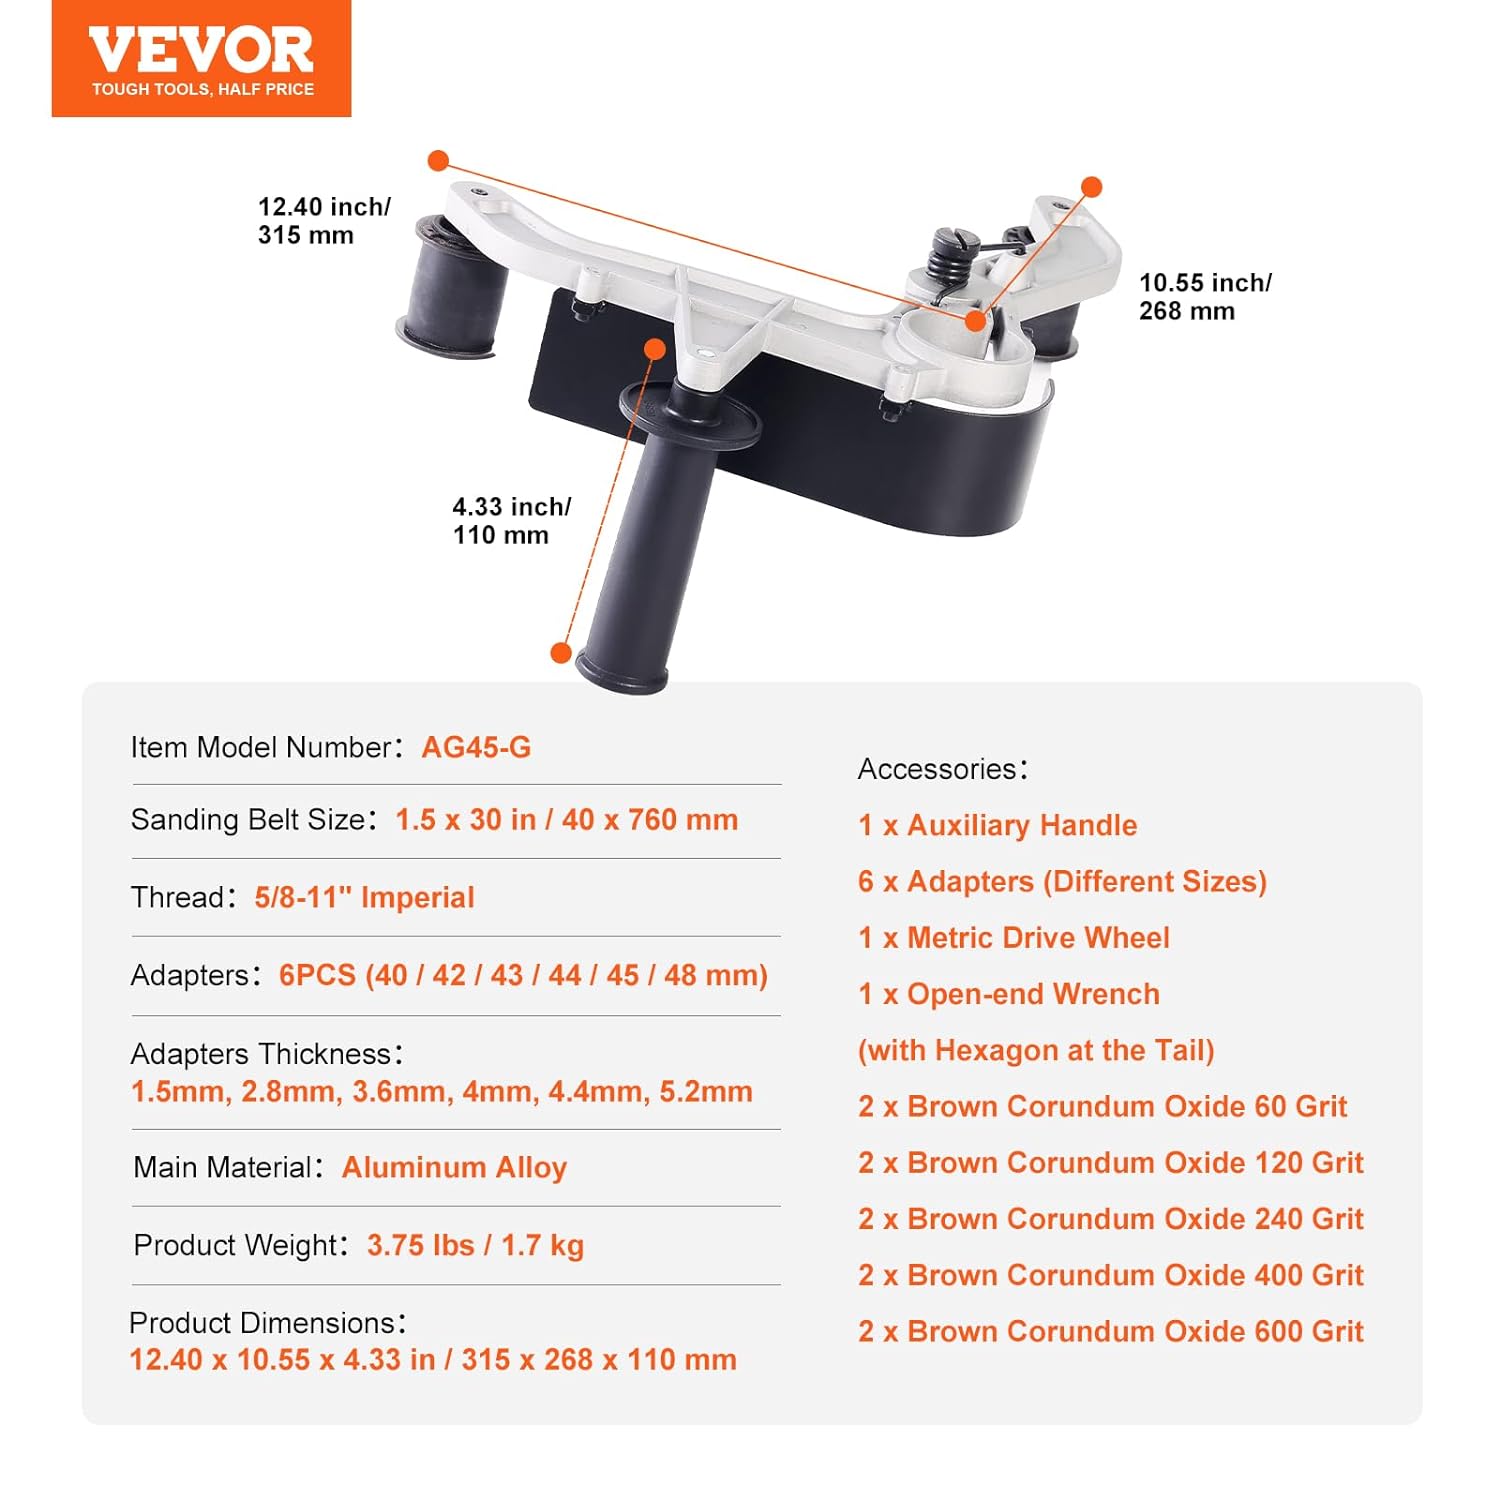 VEVOR Belt Sander Adapter for Angle Grinder, Pipe or Tube Sanding Attachment with 5/8-11 Imperial Thread and 10PCS Sanding Belts, Belt Sander Attachment Pipe Polishing Adapter for Rust Removal